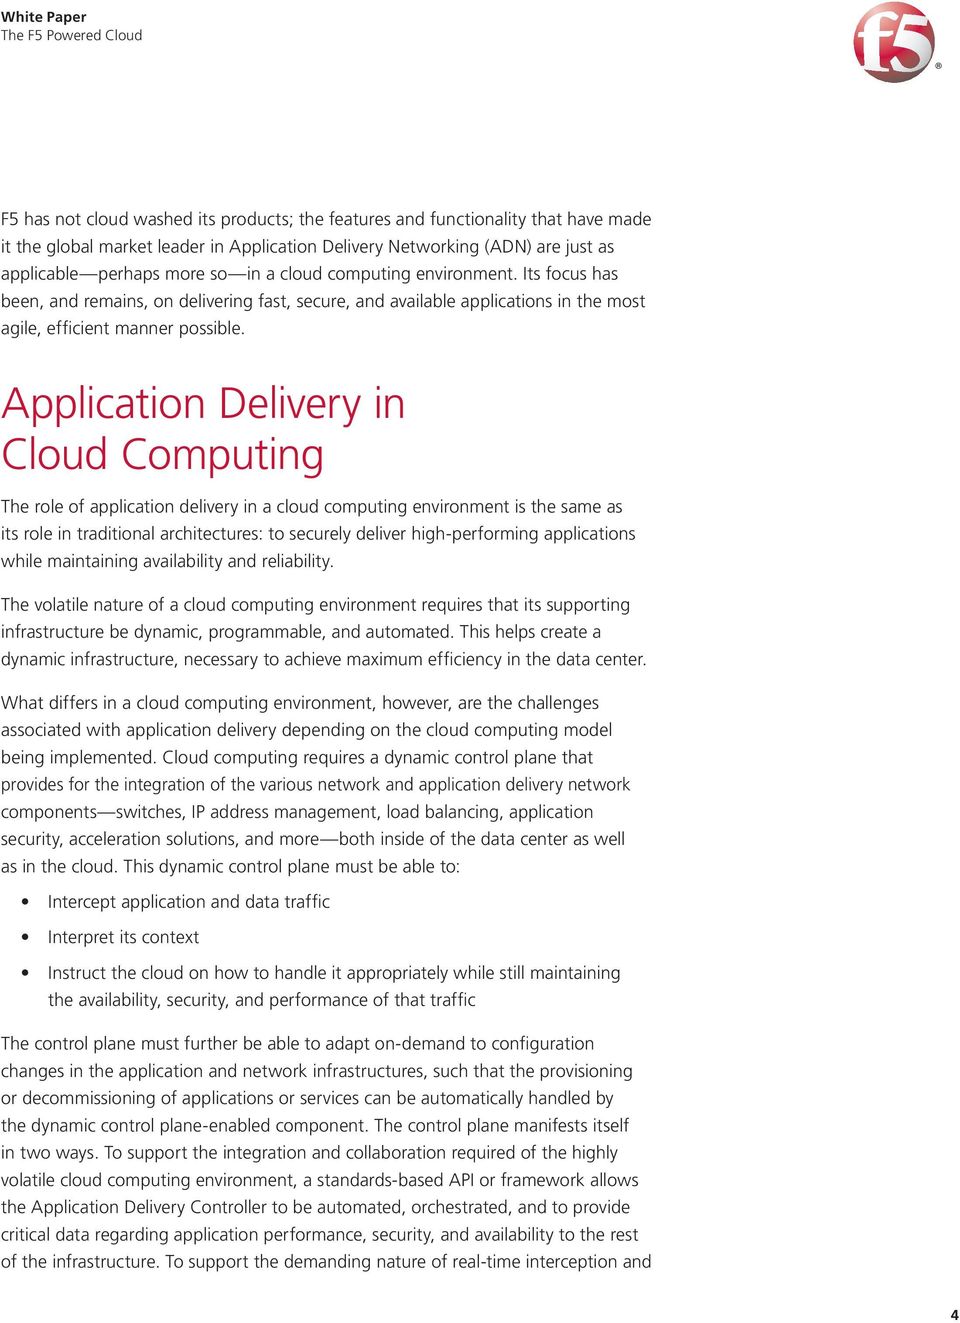 Application Delivery in Cloud Computing The role of application delivery in a cloud computing environment is the same as its role in traditional architectures: to securely deliver high-performing